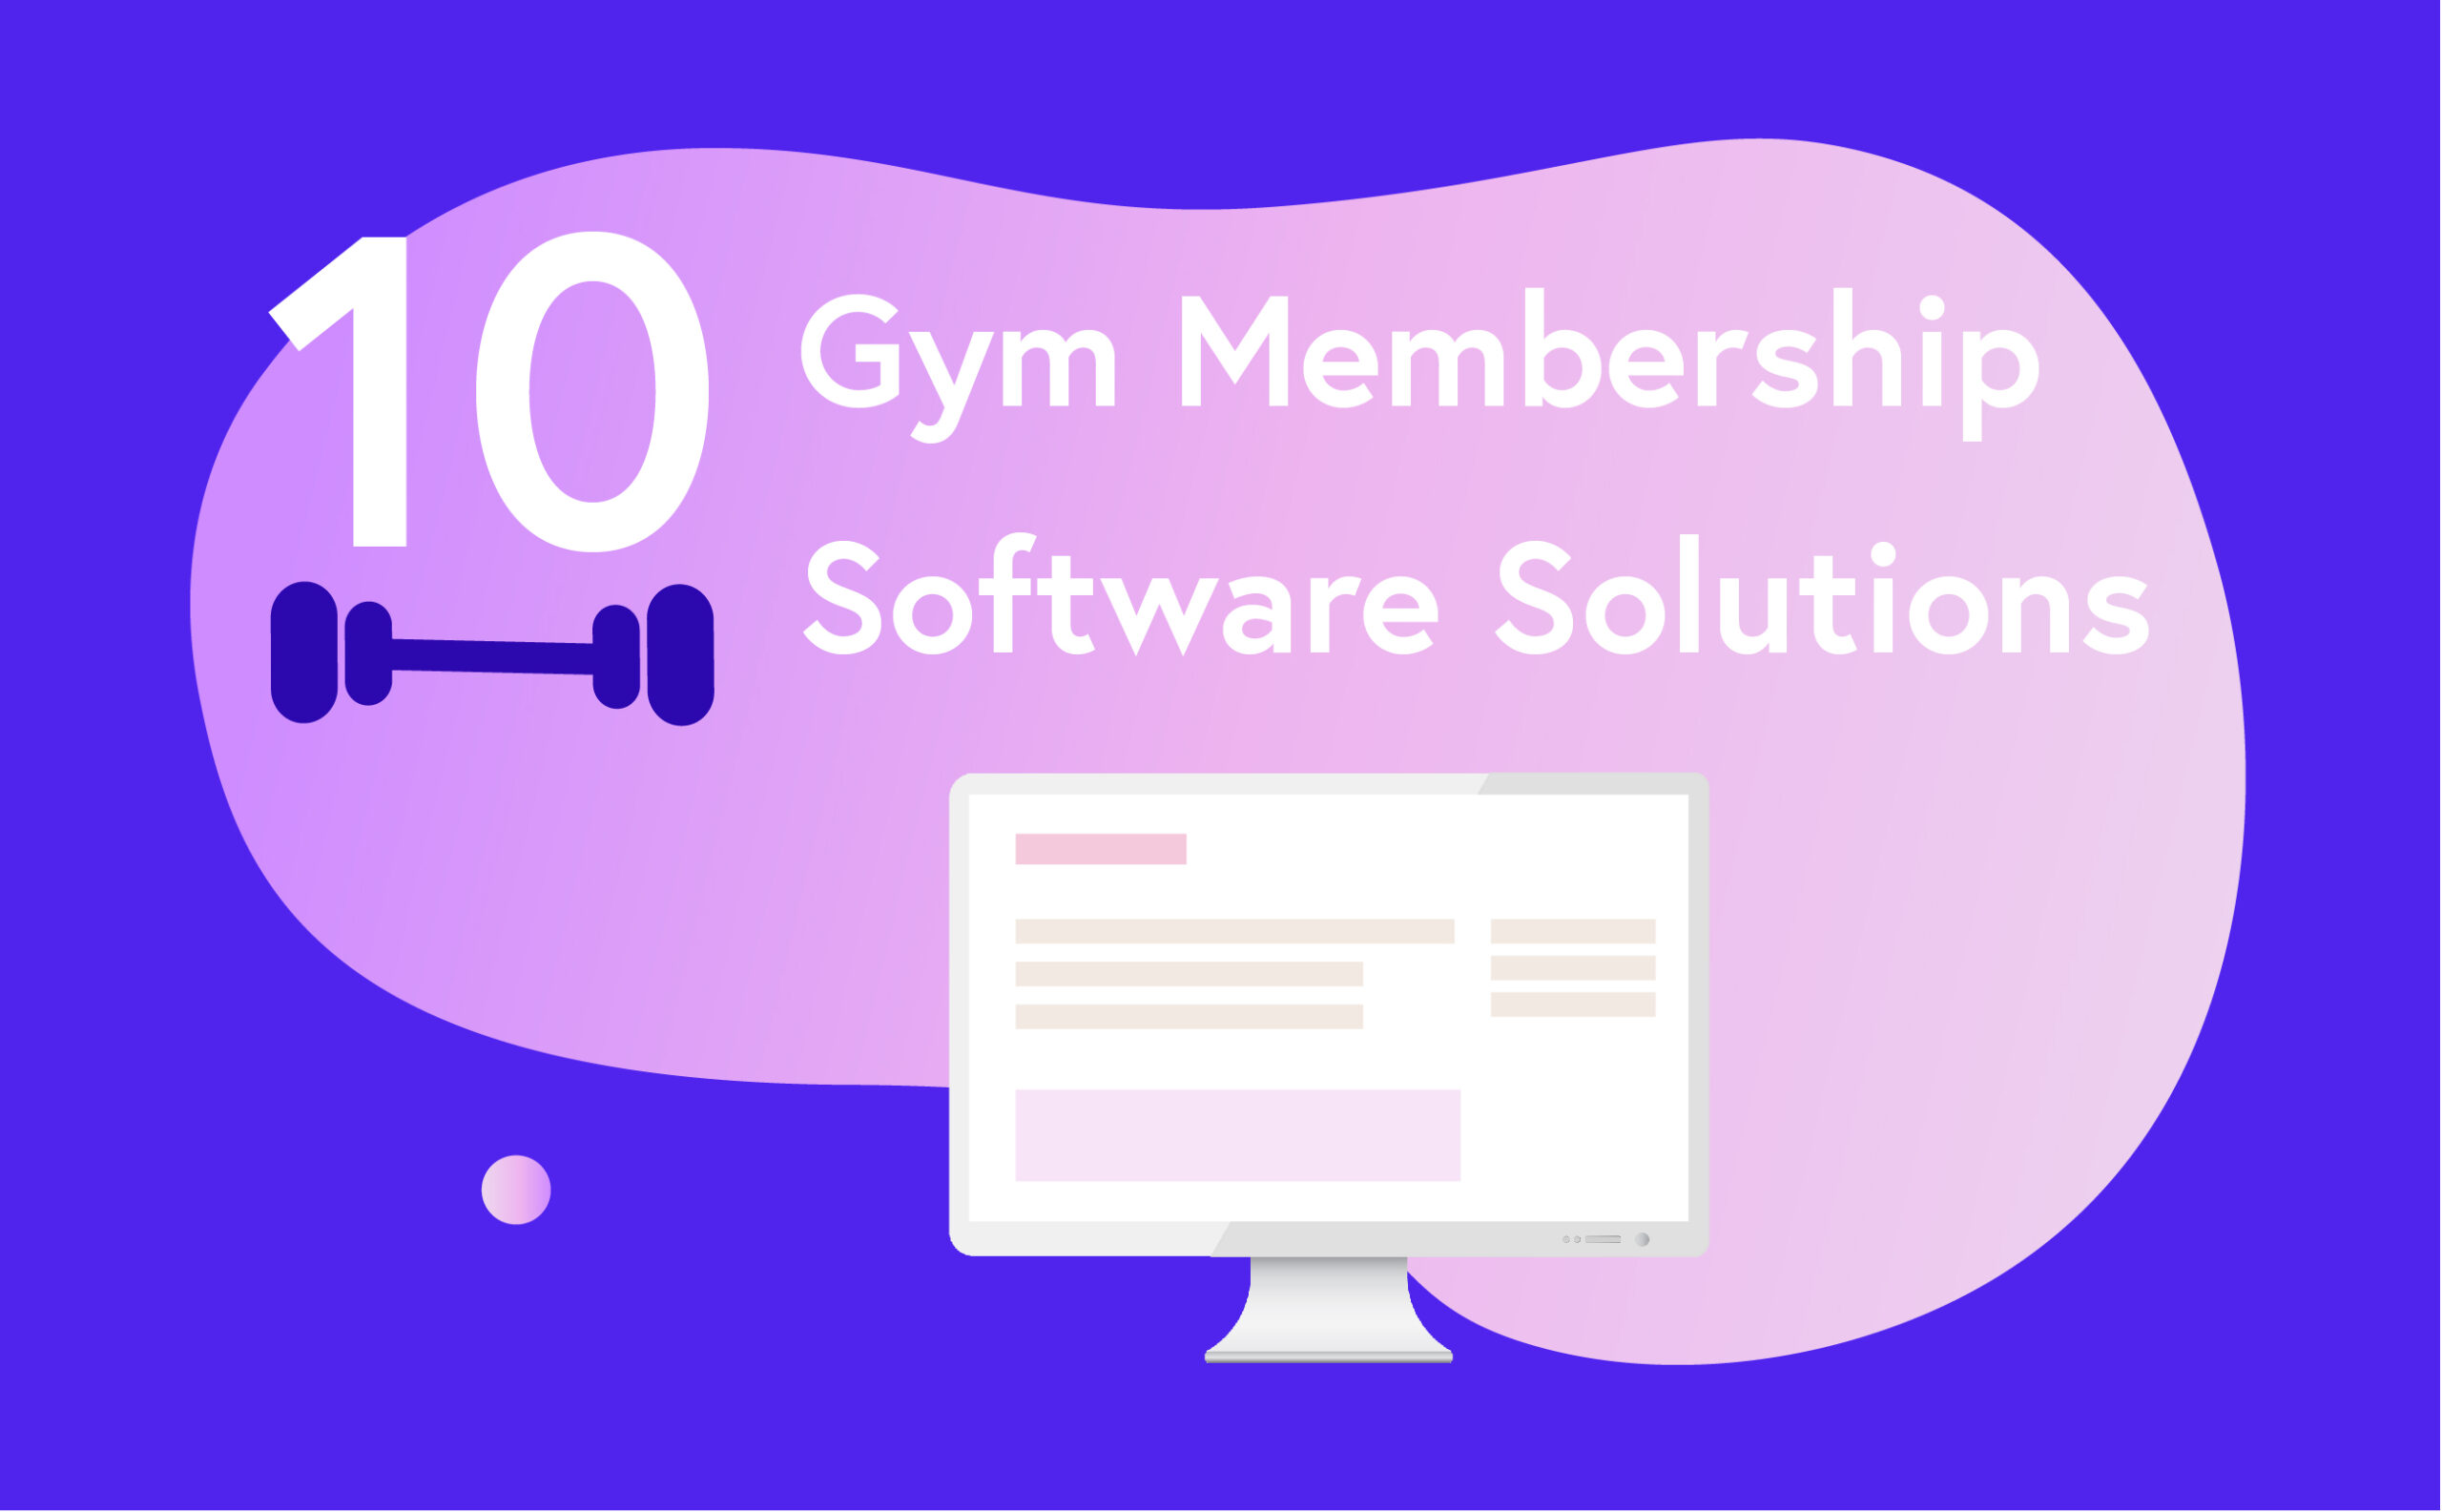 Gym Management Software: 10 Options to Carry You Through Social Distancing